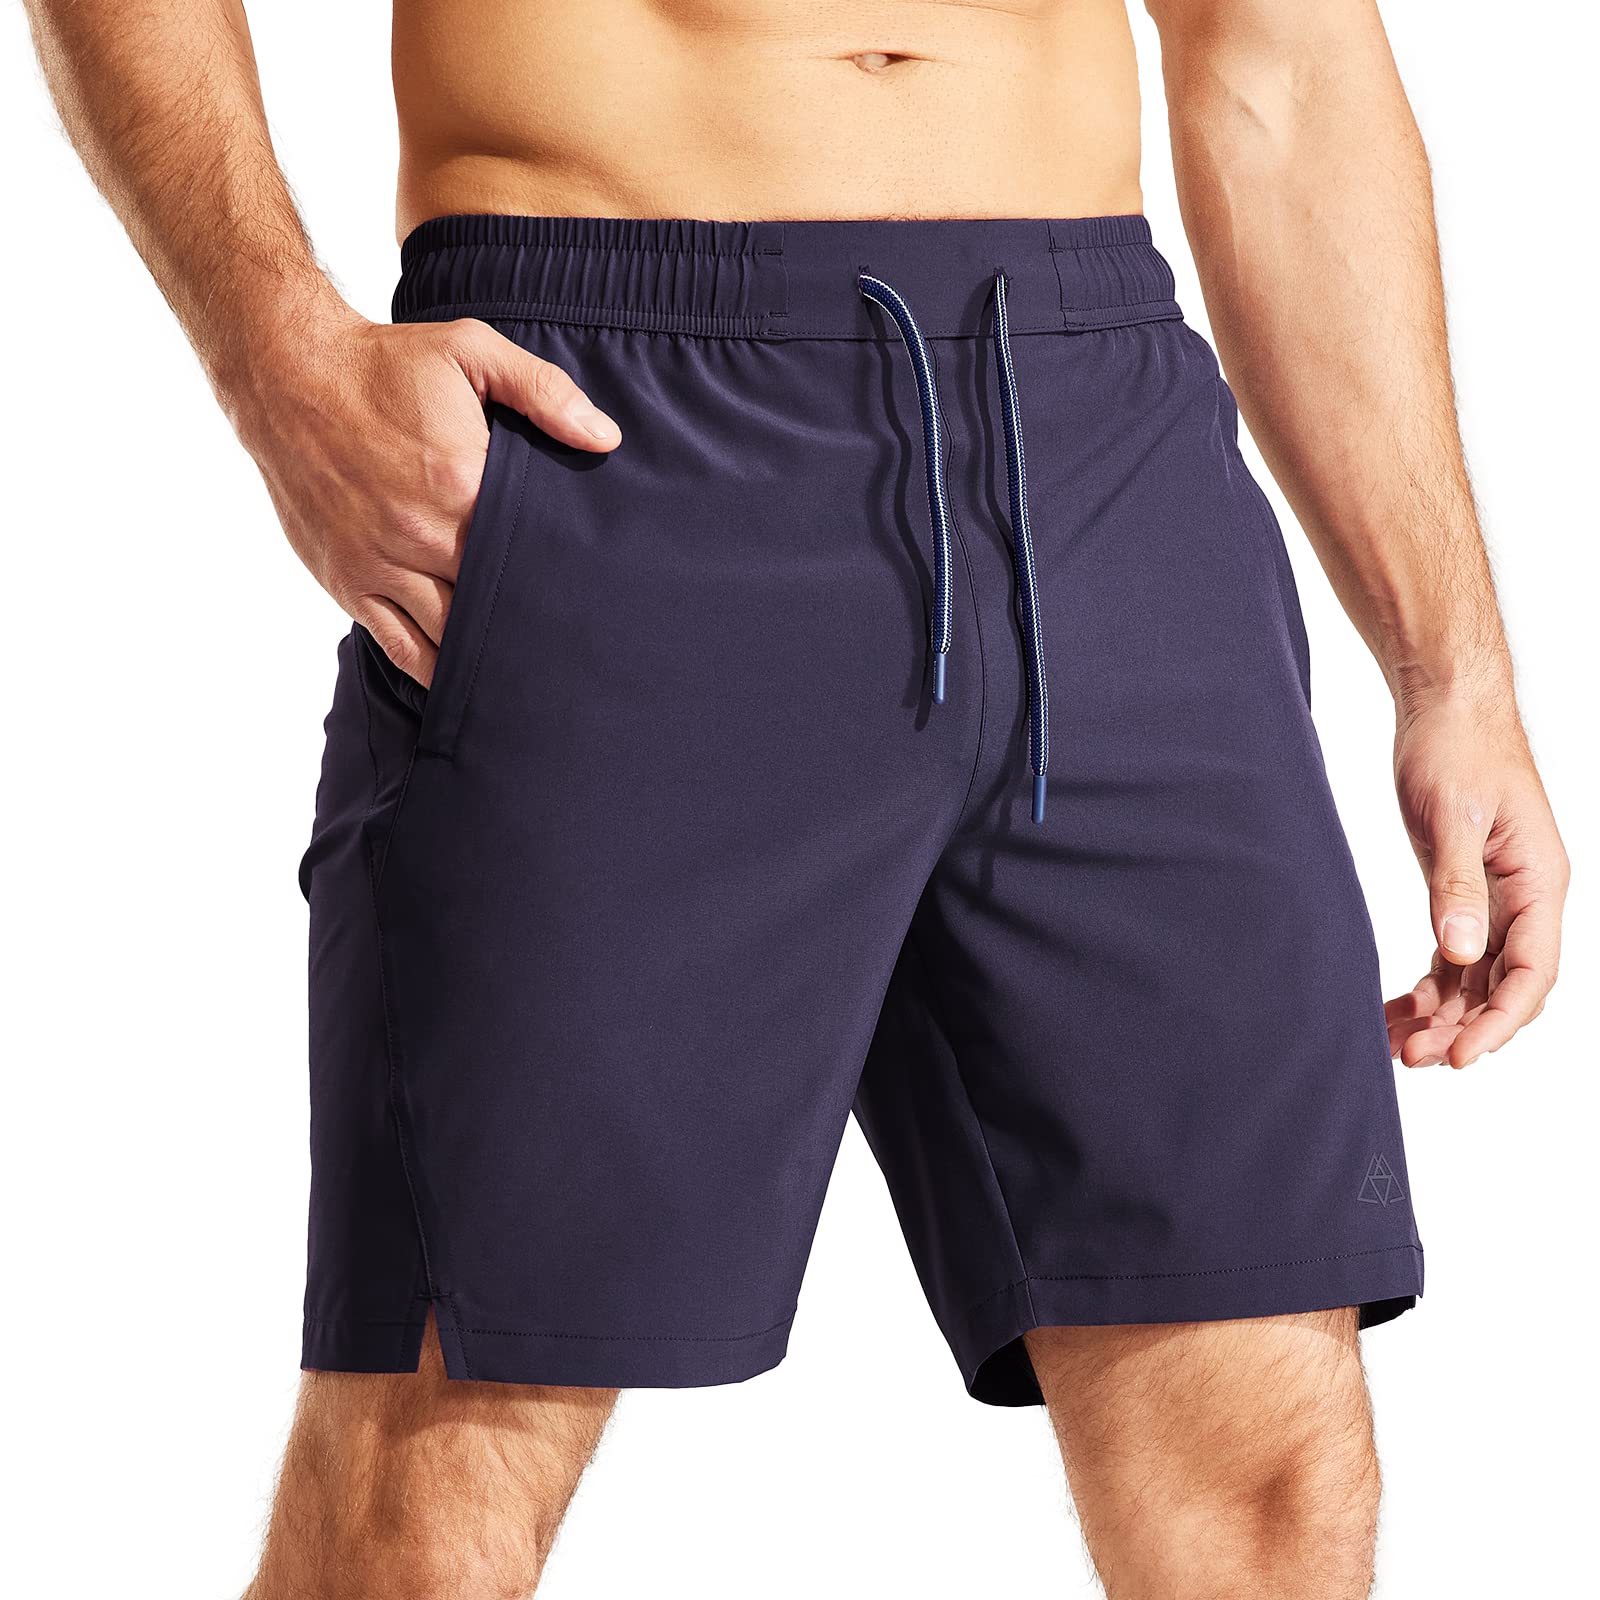 Men's Running Shorts Quick Dry Athletic Workout Gym Shorts with Zipper  Pockets Men's Performance Gear Shorts, Men's Athletic Shorts